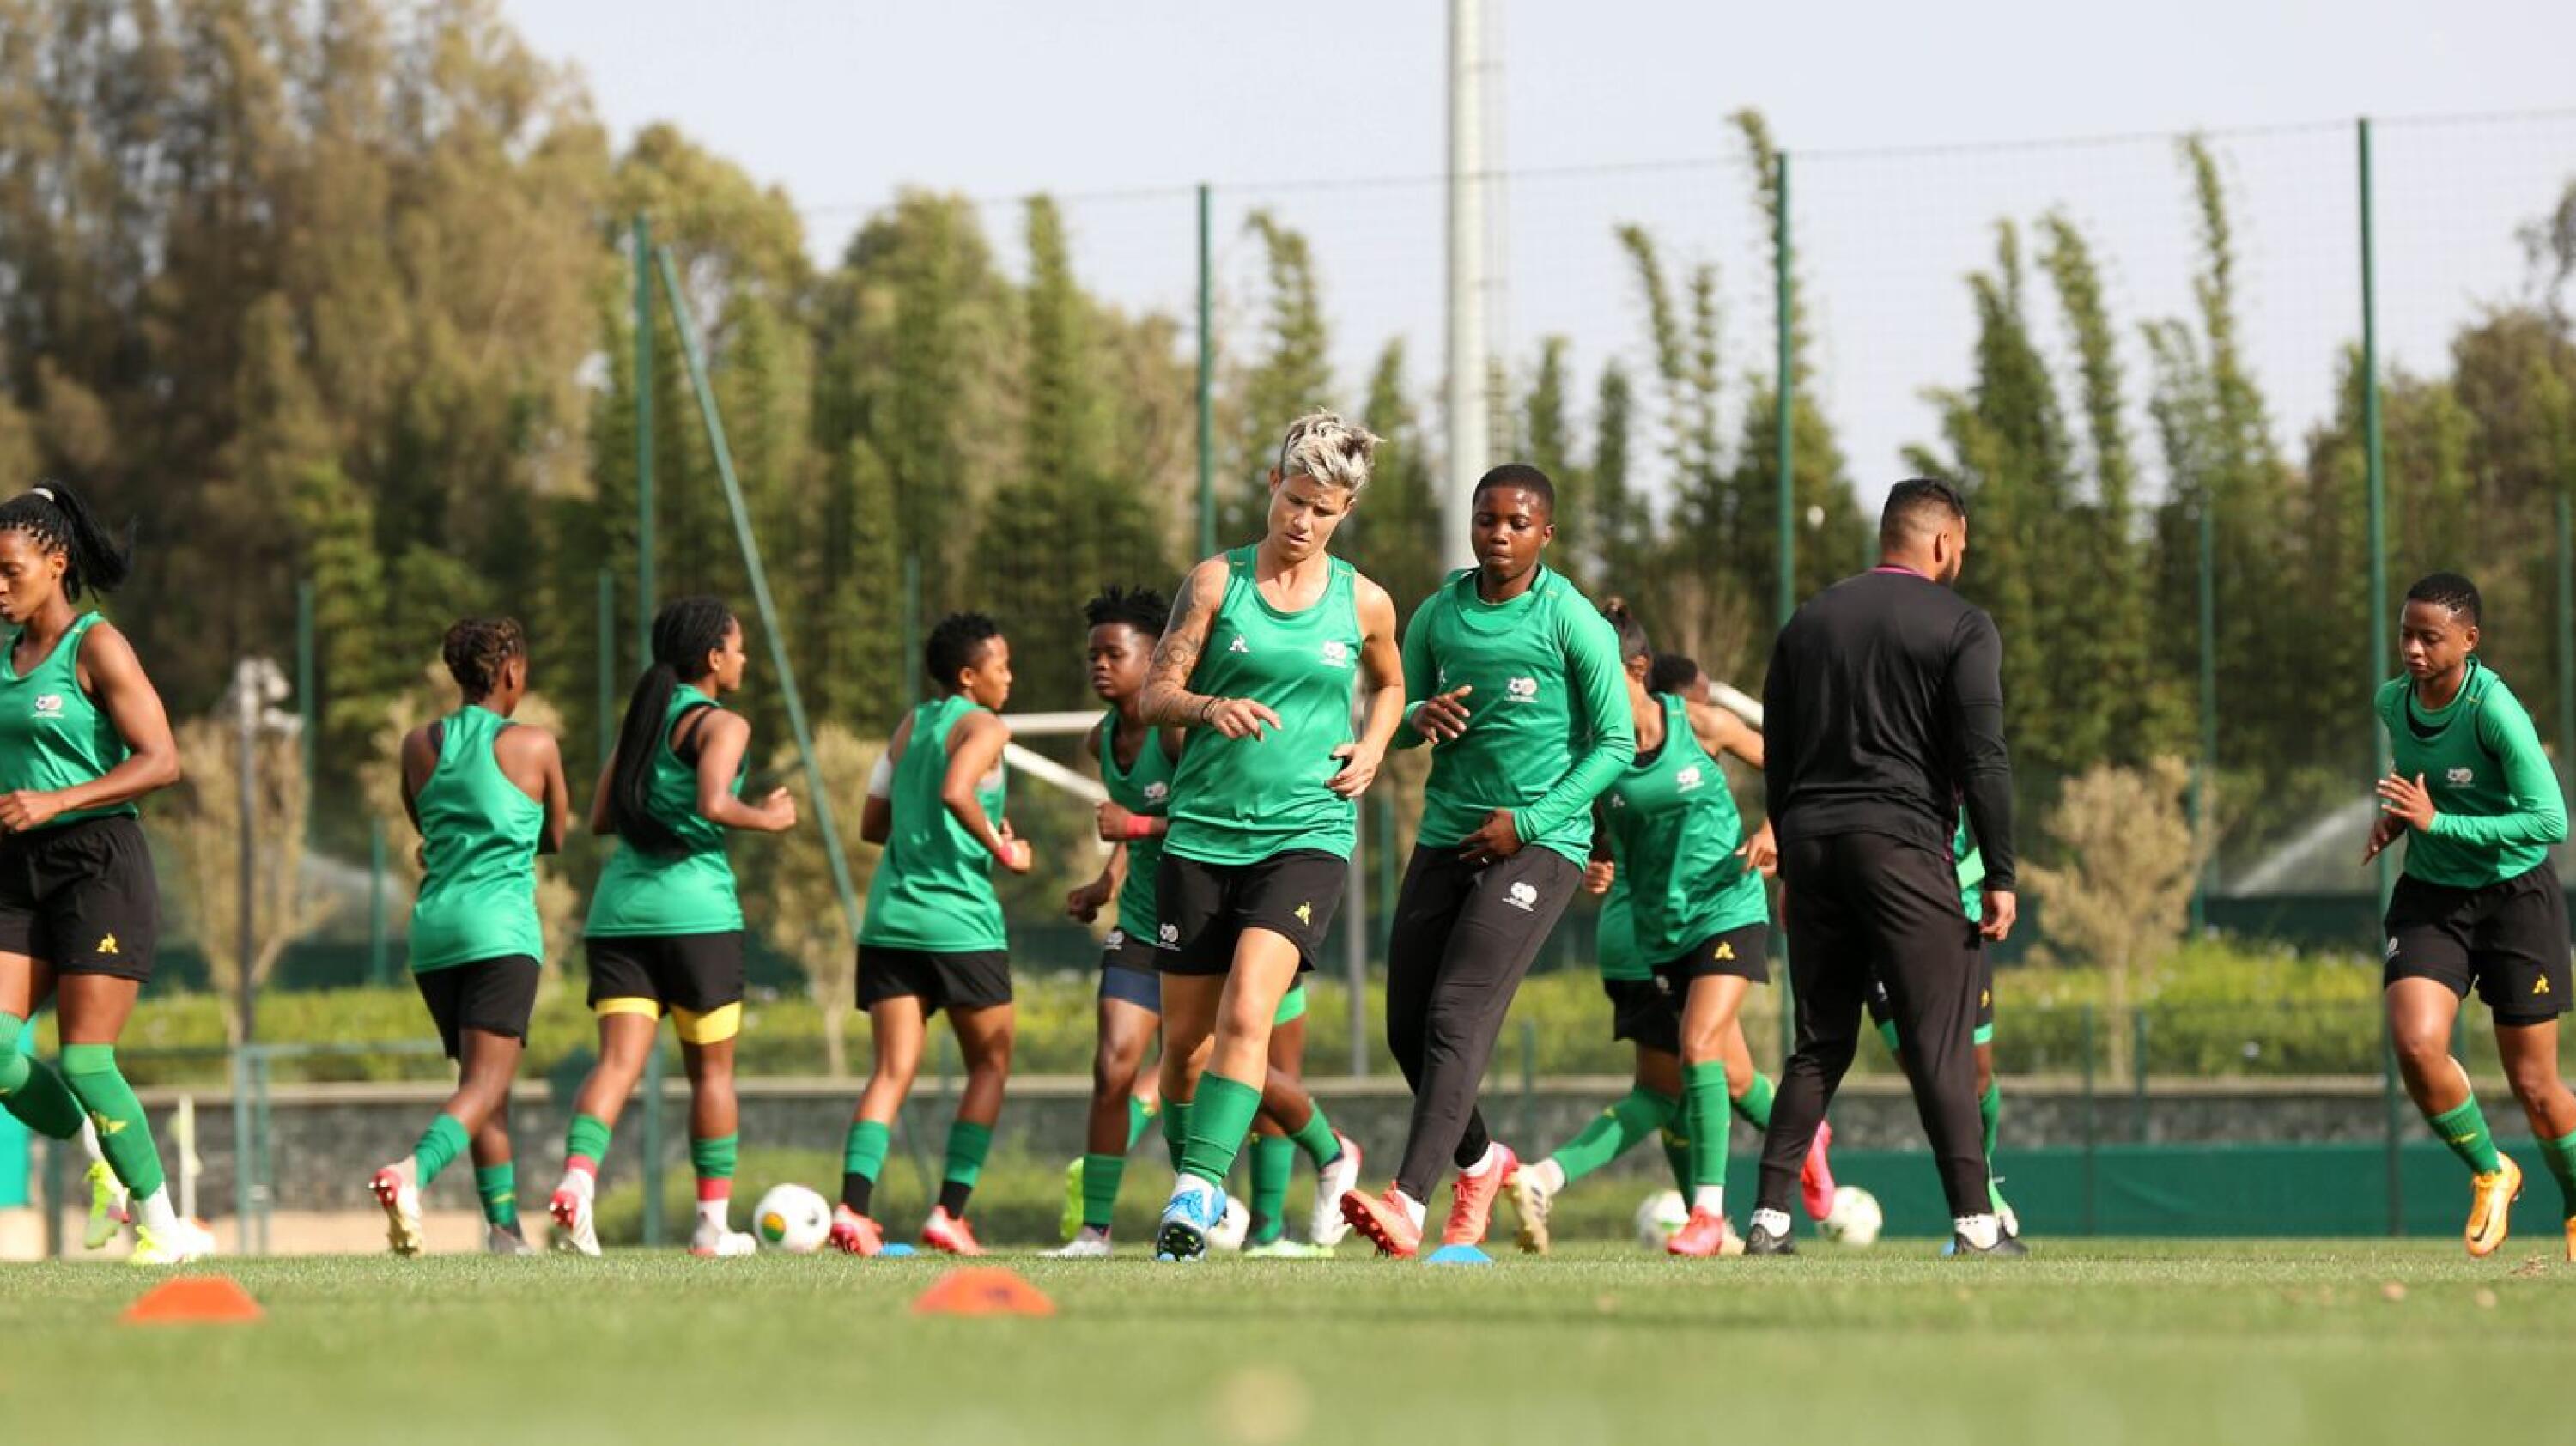 Banyana Banyana players during the 2022 Womens Africa Cup Of Nations training session at Complex Mohamed VI De Football, Rabat